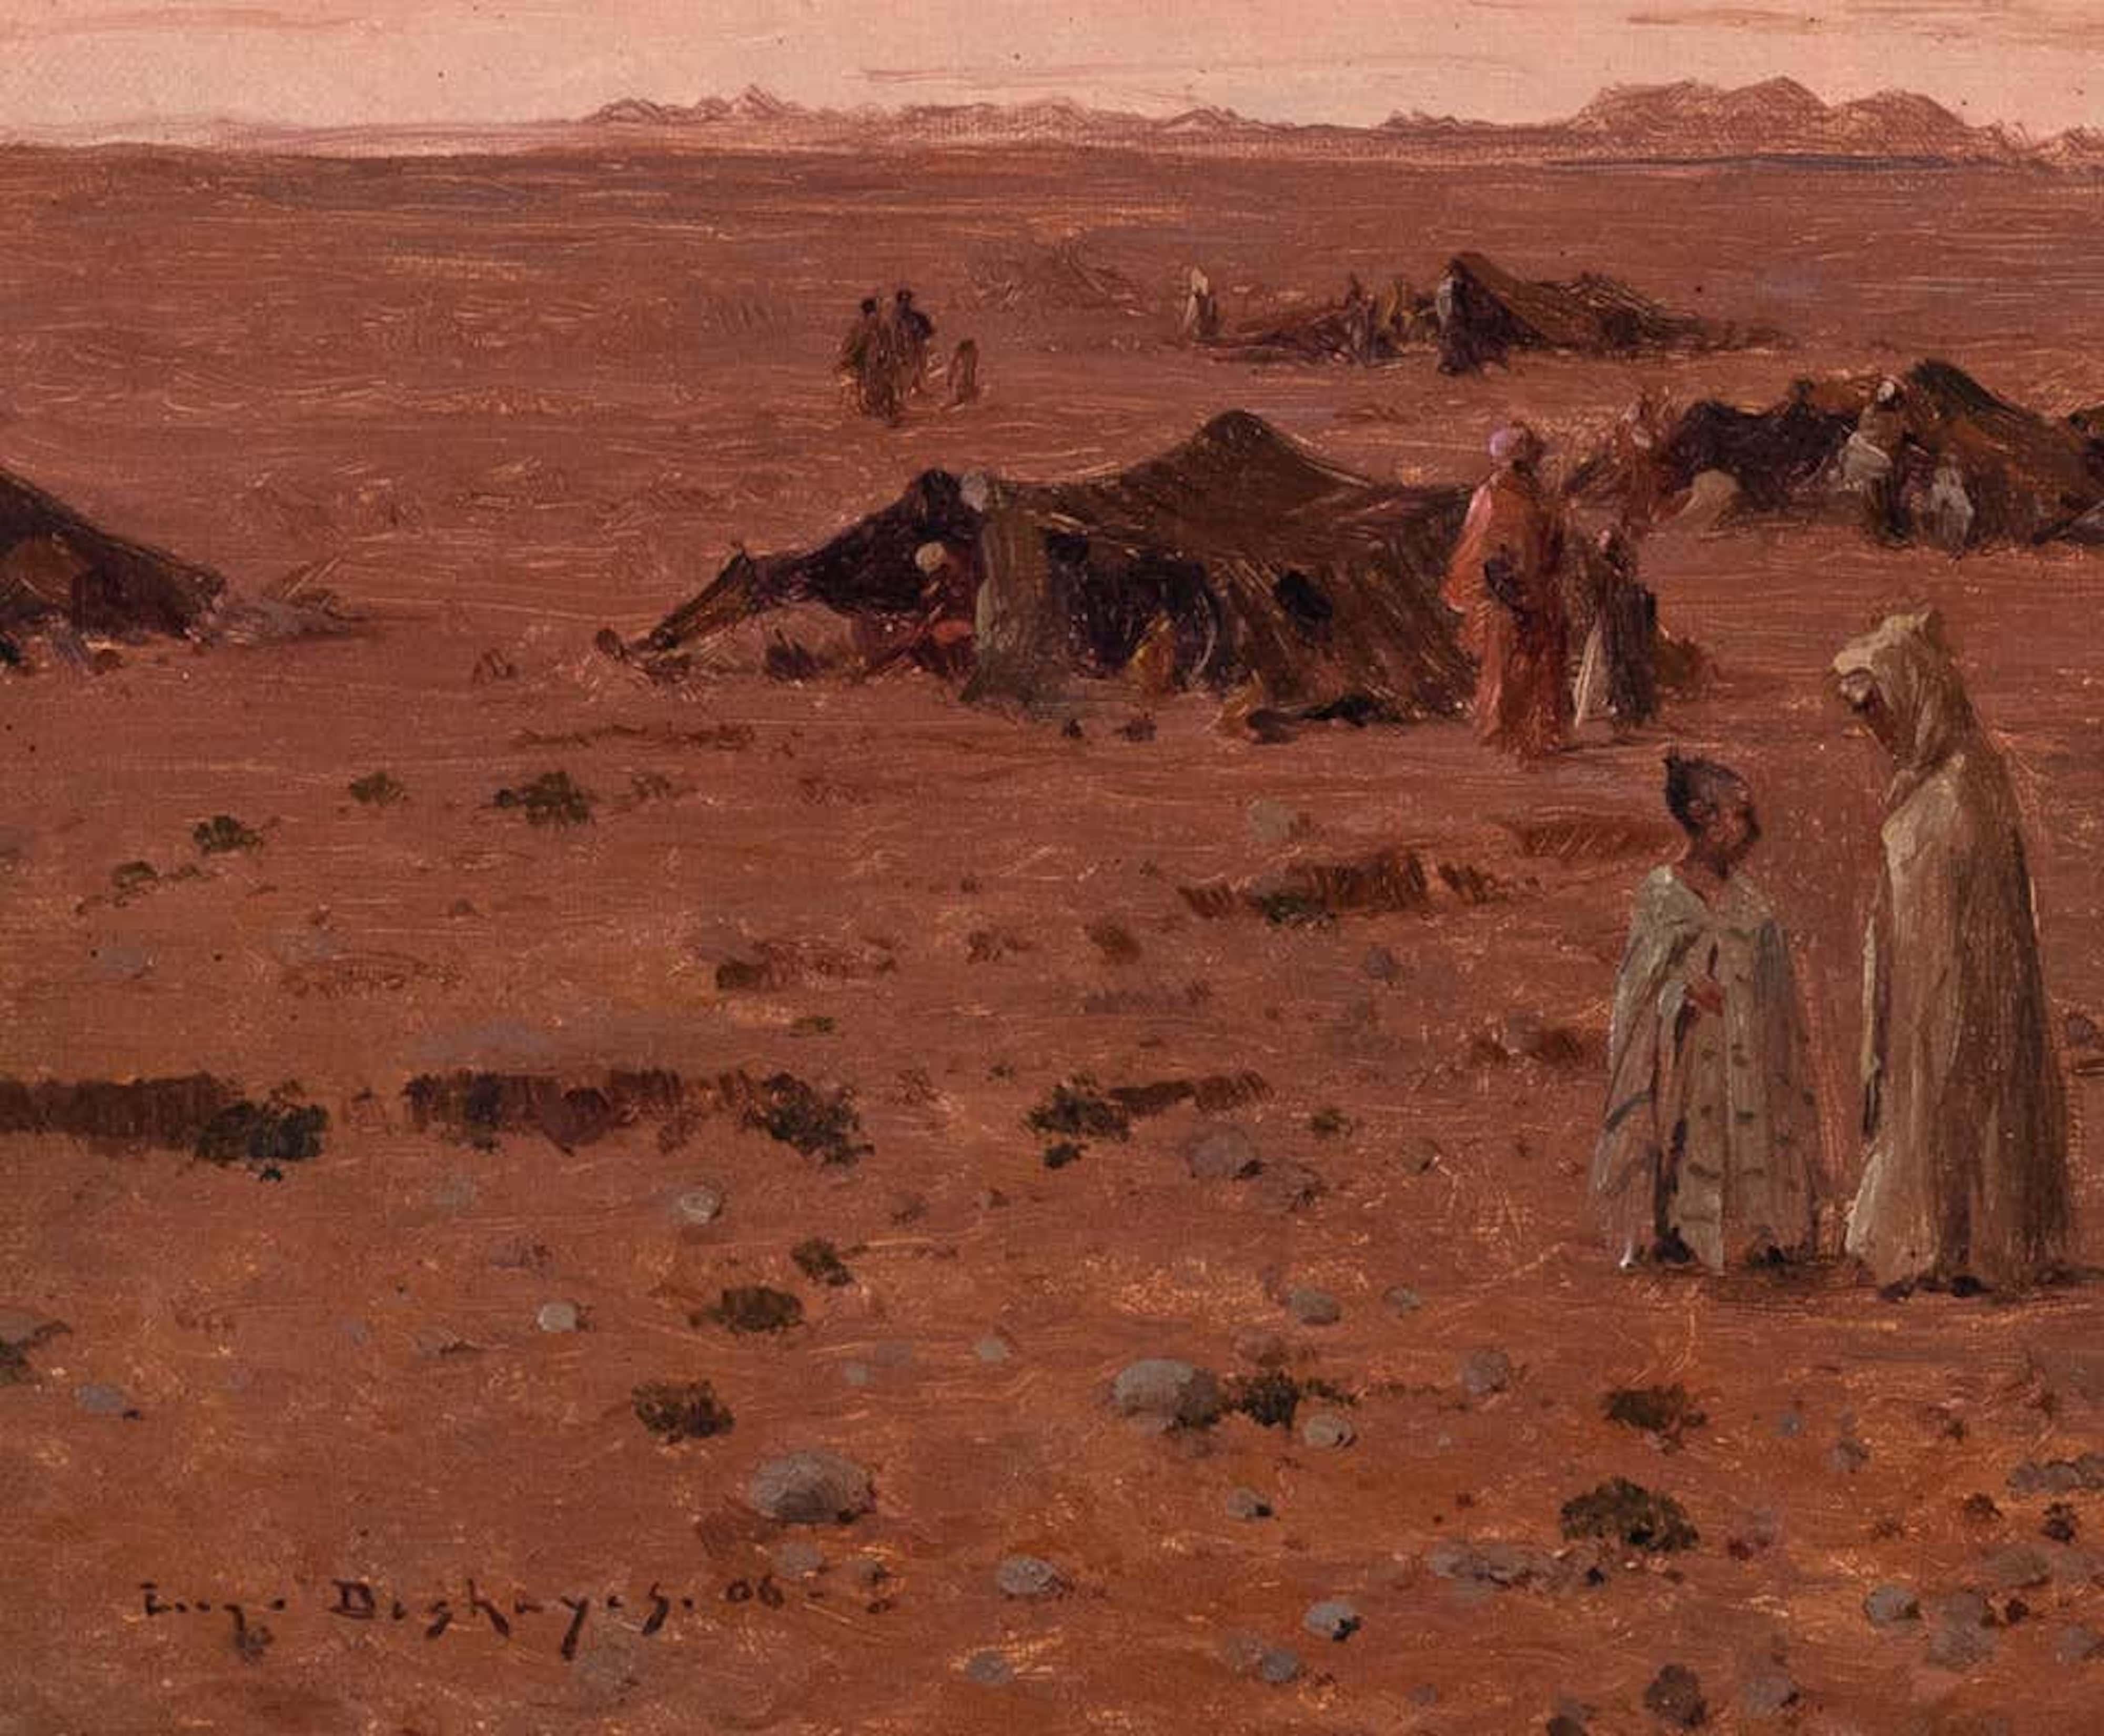 The Bedouin Camp - Painting by Eugène Deshayes